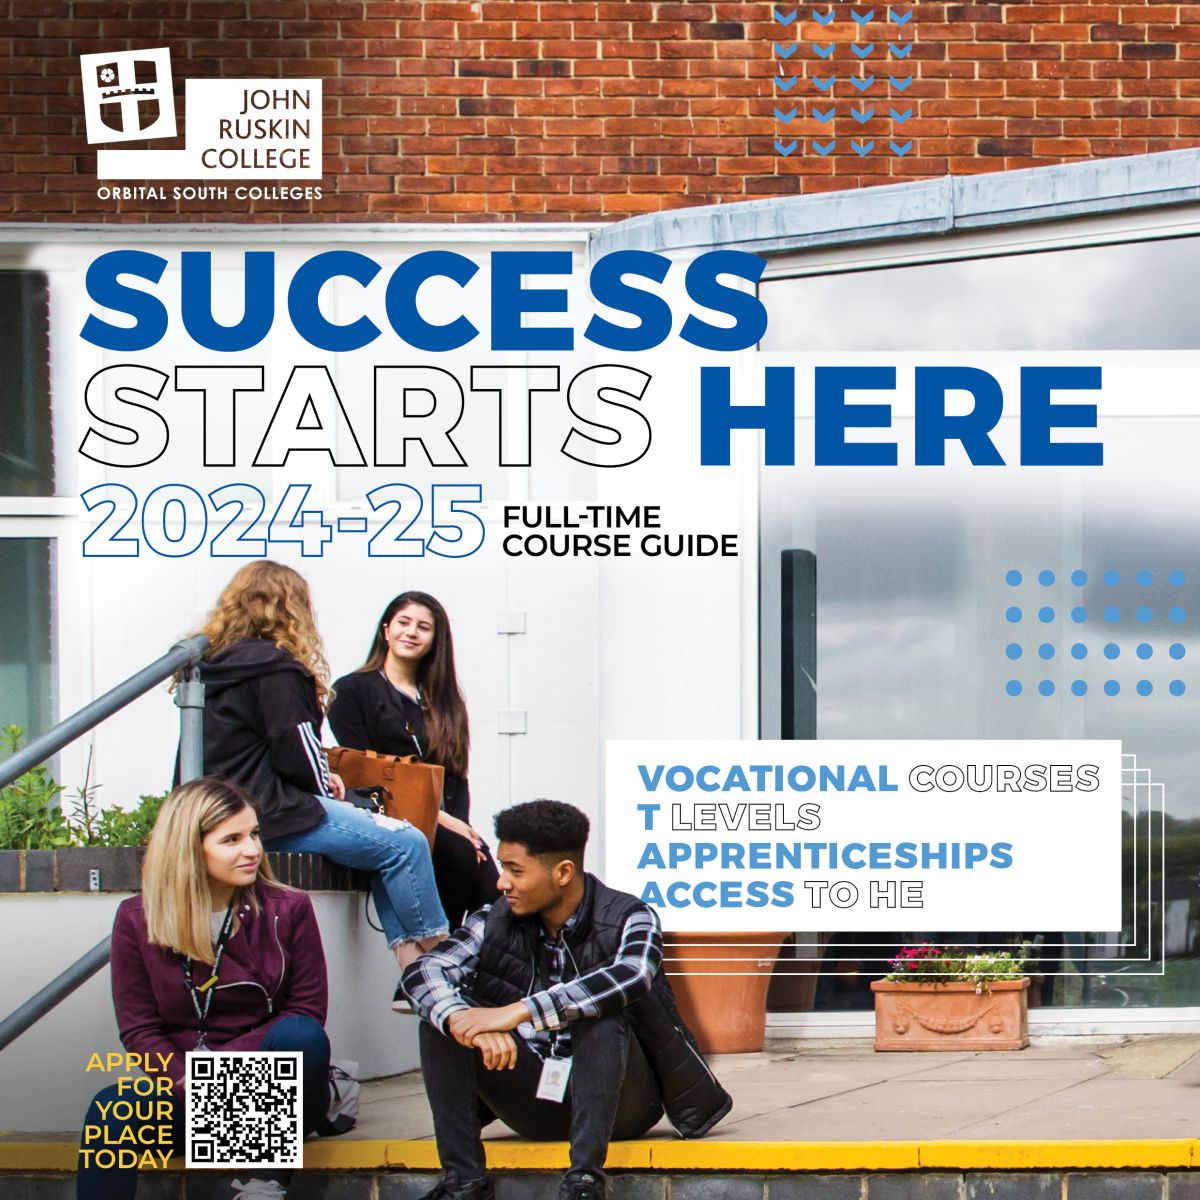 Full-time course guide cover